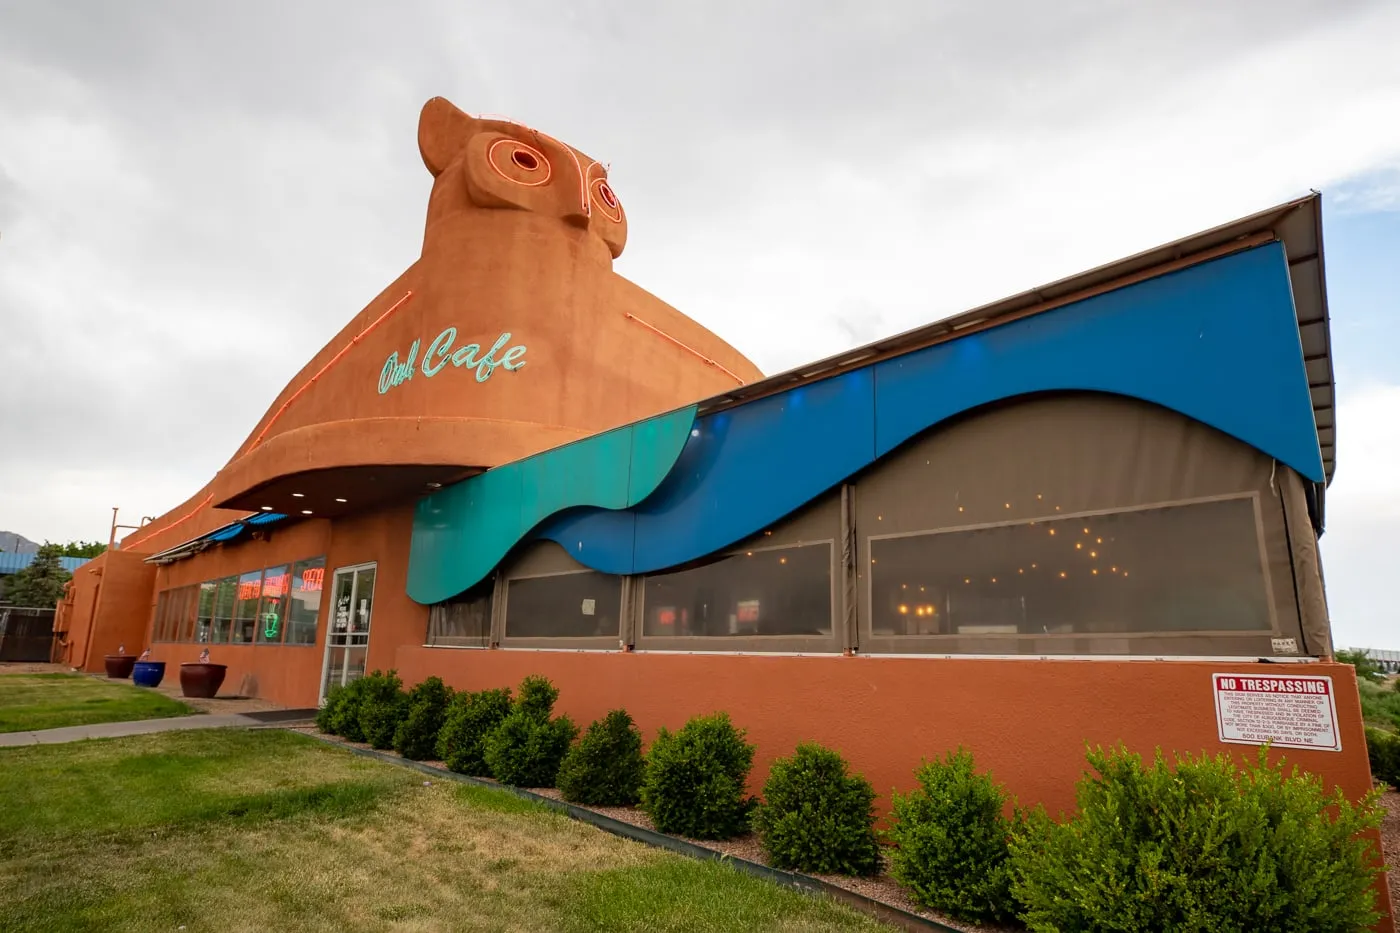 Owl Cafe in Albuquerque, New Mexico (Route 66) - Owl-shaped building and Arizona Route 66 roadside attraction and diner